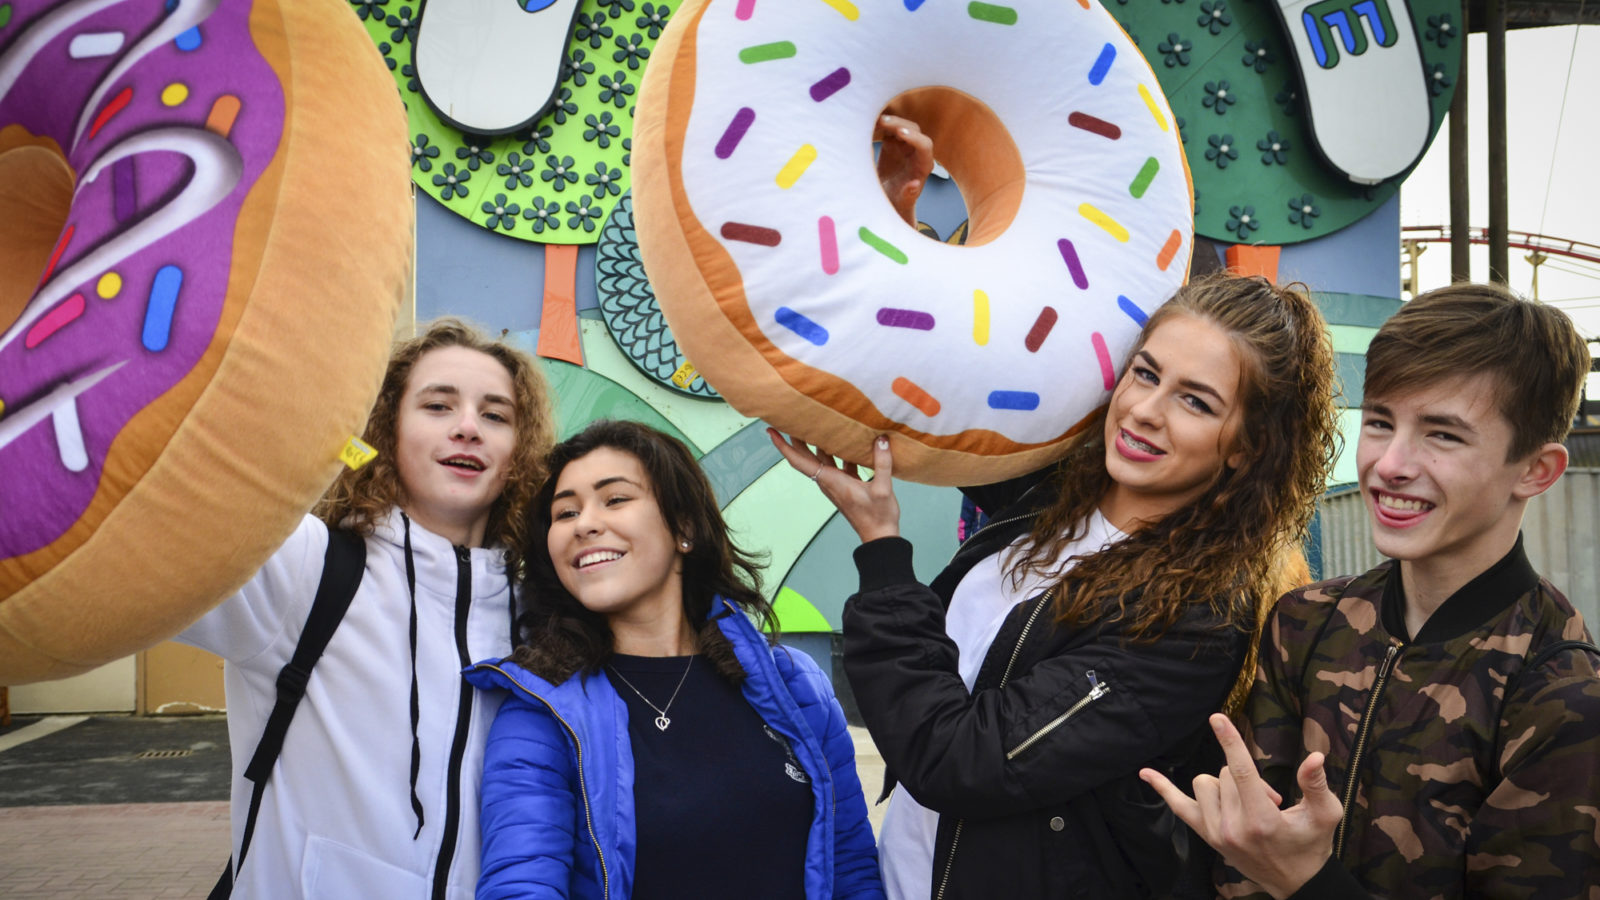 A group of four teenagers, posing for a photograph with two giant doughnut toys.